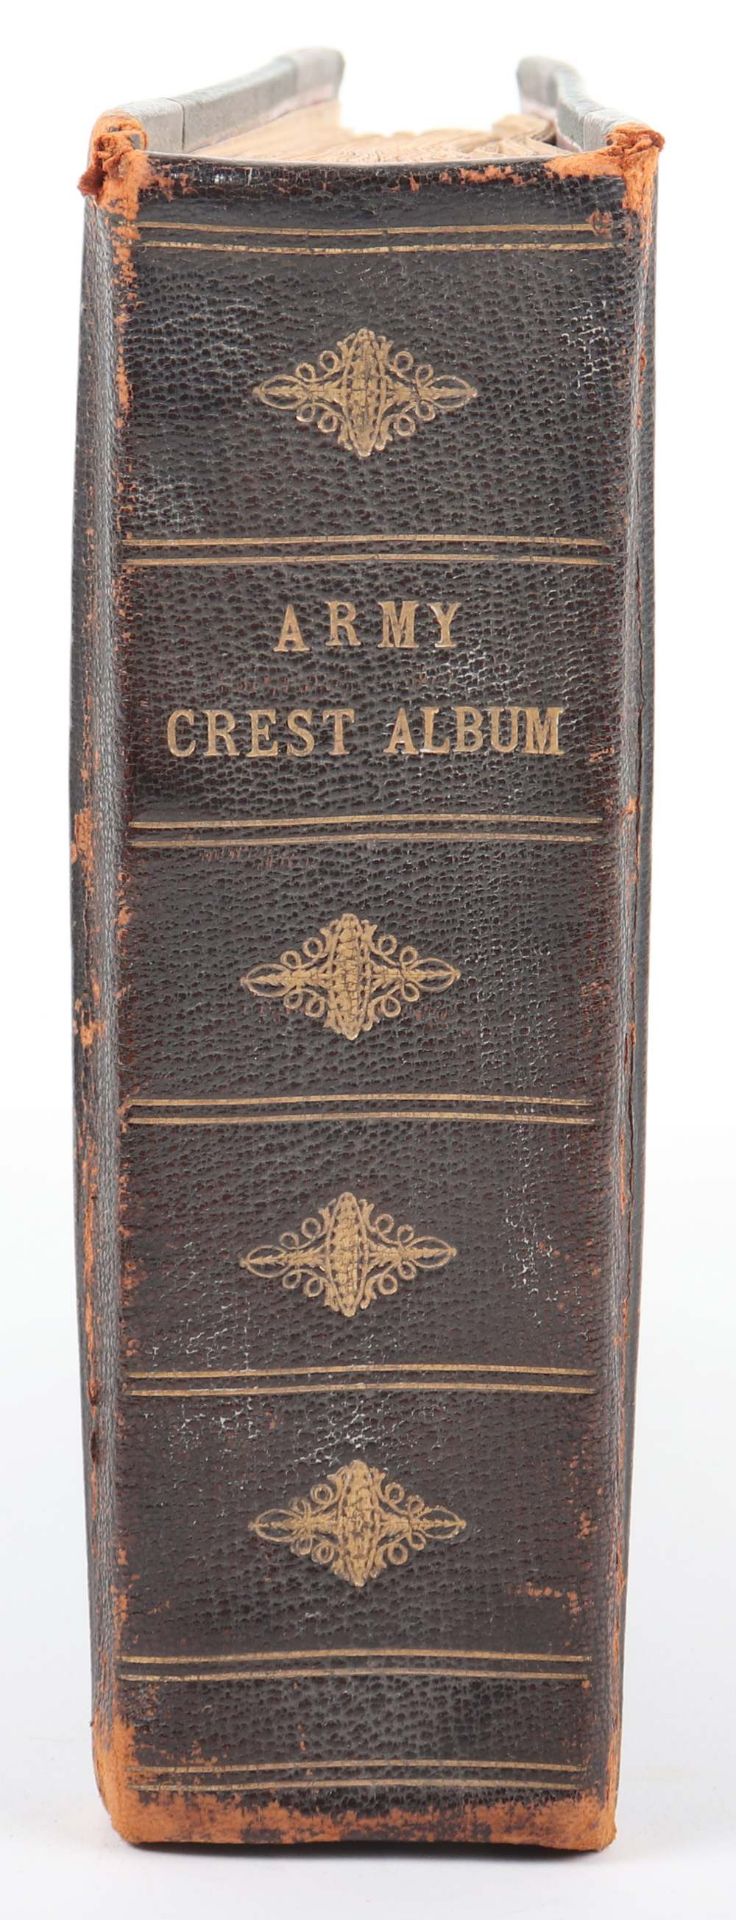 The British Army Crest Album Published by Gale & Polden c. 1900 - Image 5 of 5